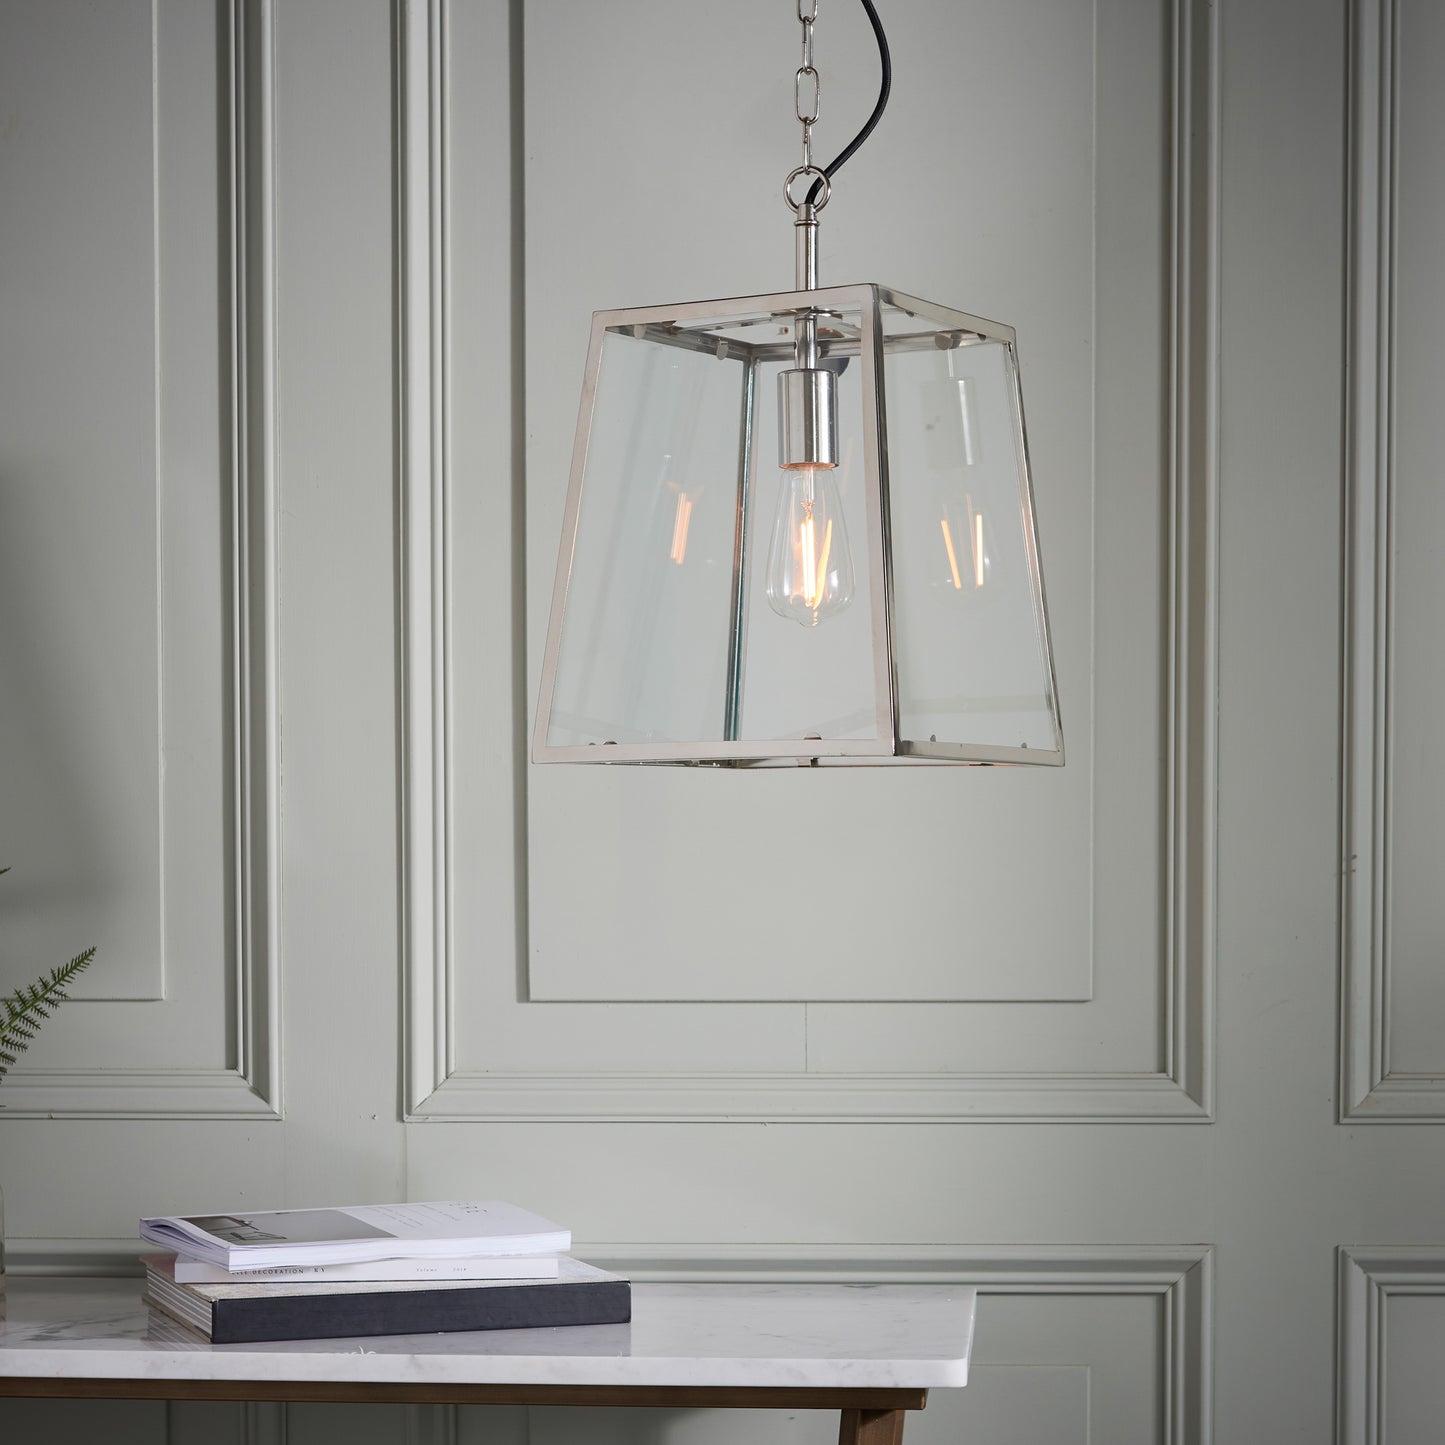 A stylish pendant light nickel hanging over a table, adding elegance to the room's interior decor.